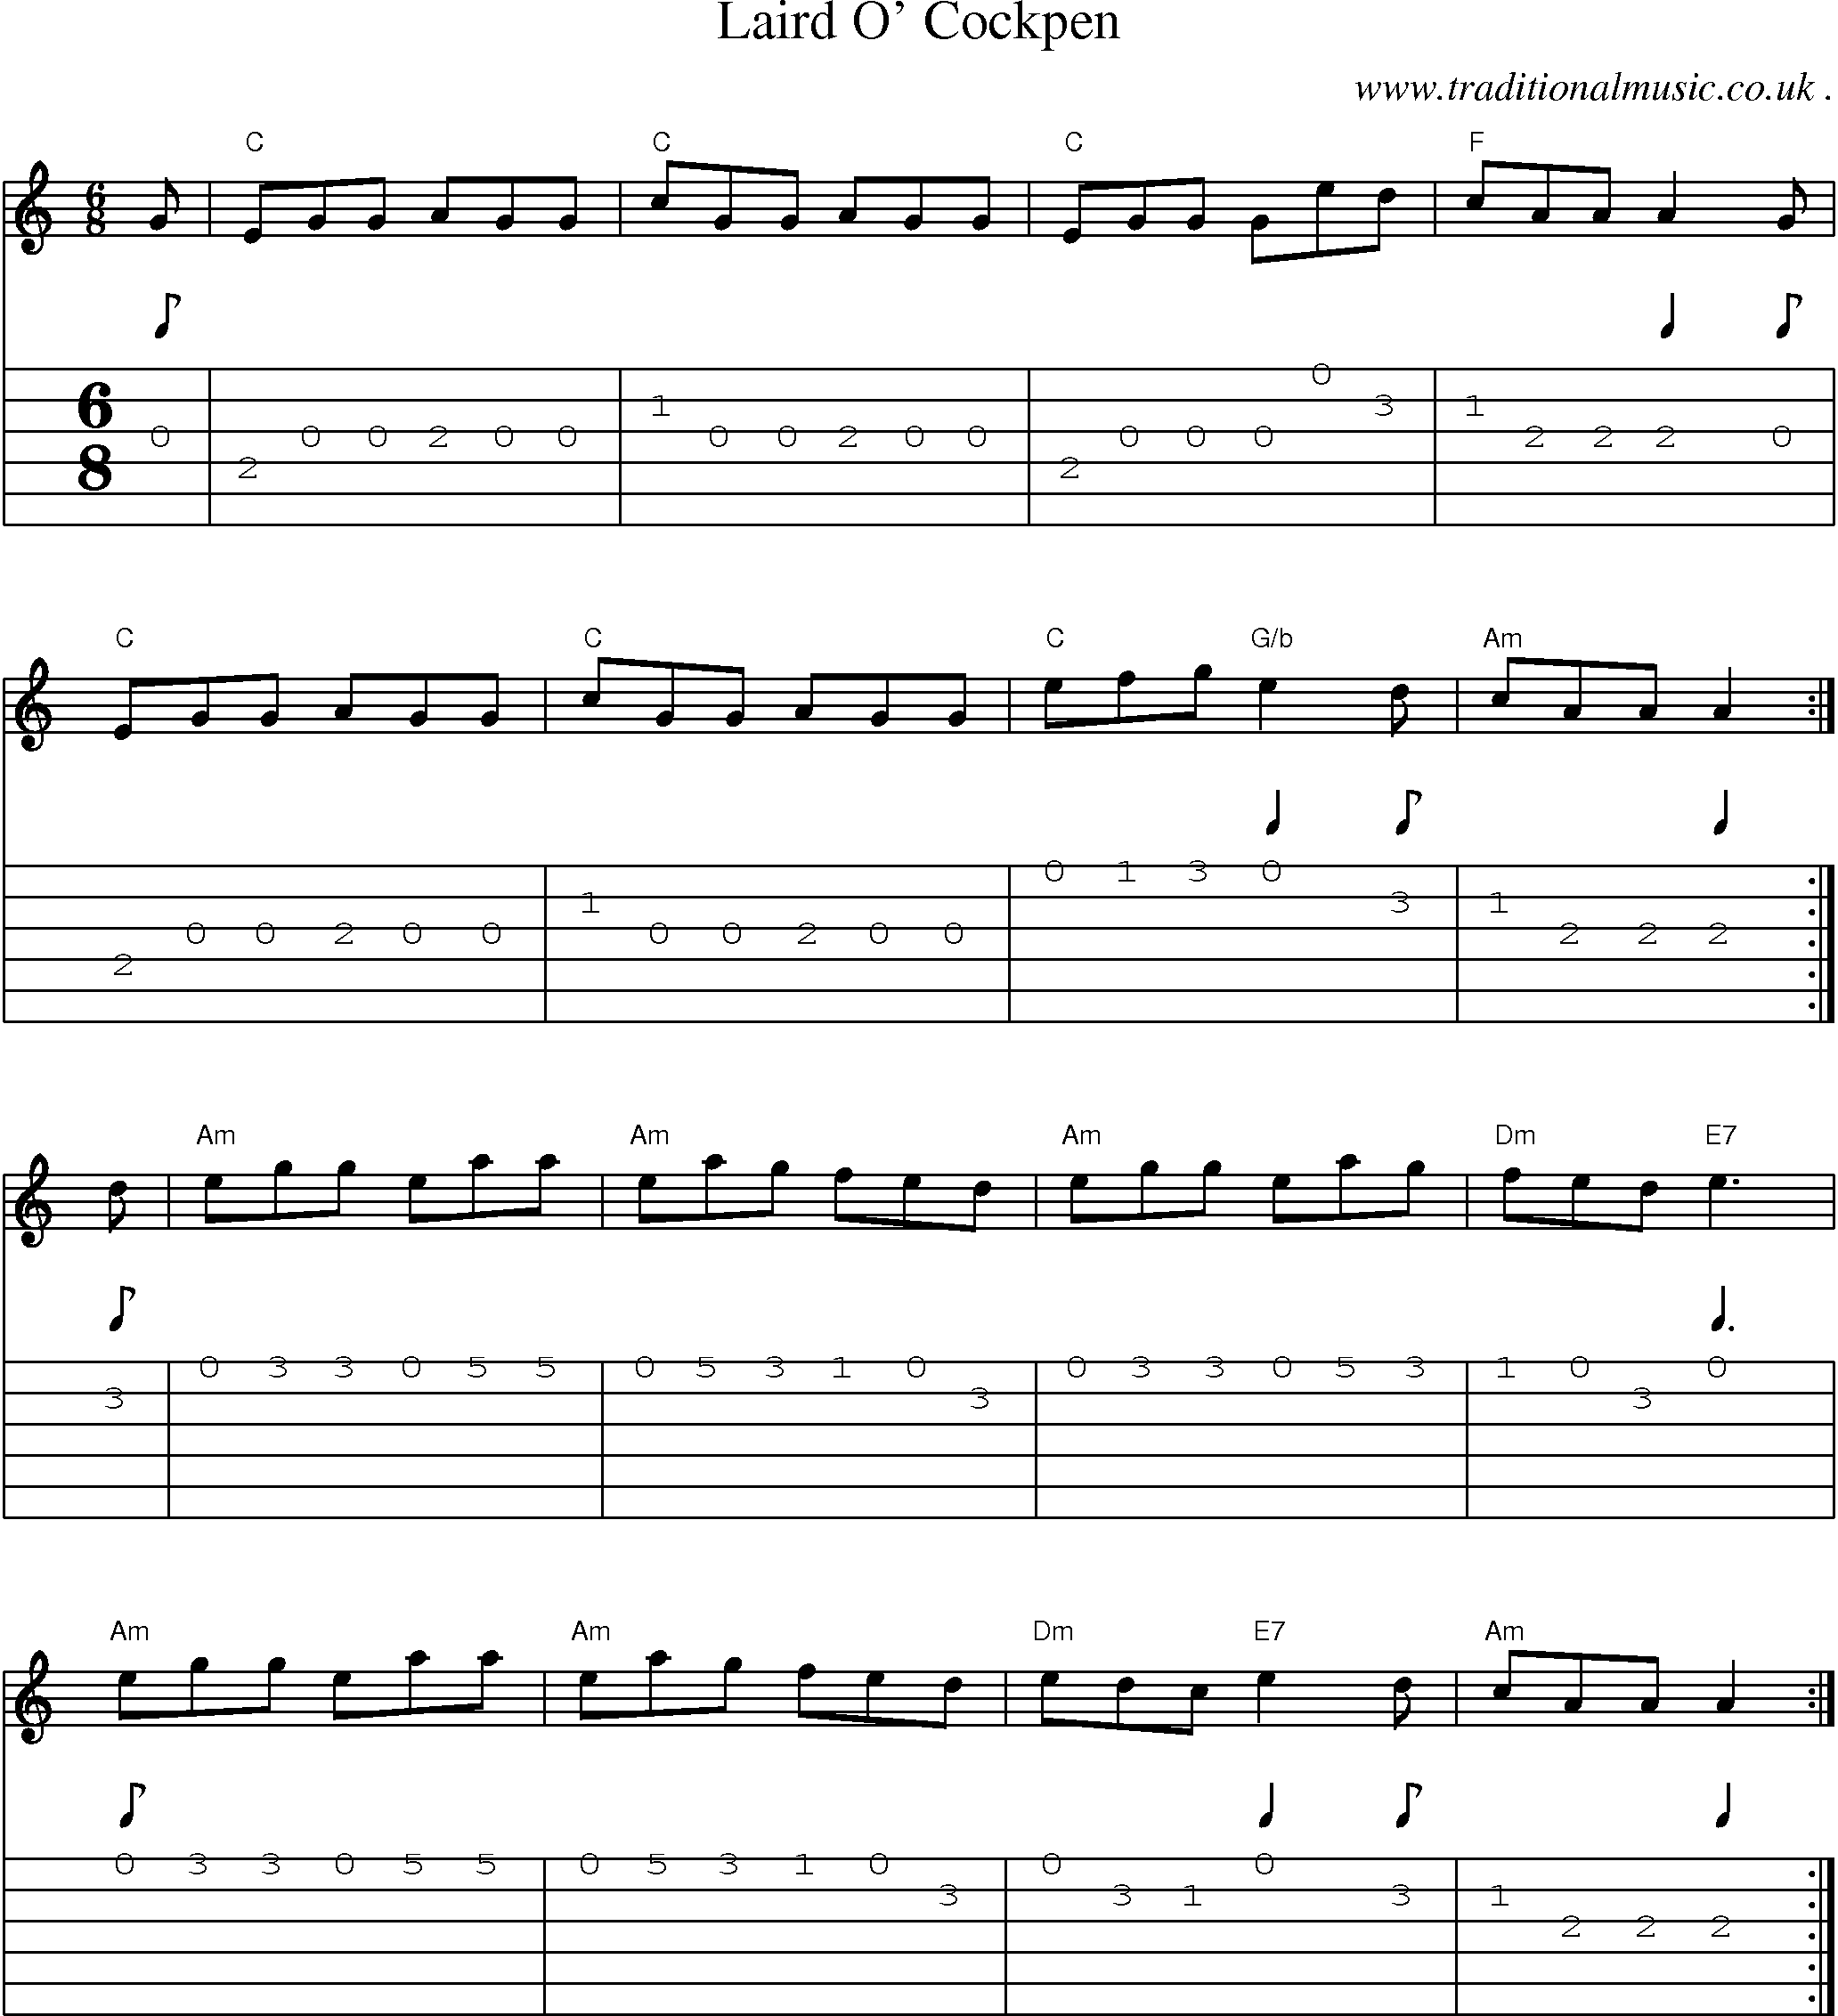 Sheet-music  score, Chords and Guitar Tabs for Laird O Cockpen